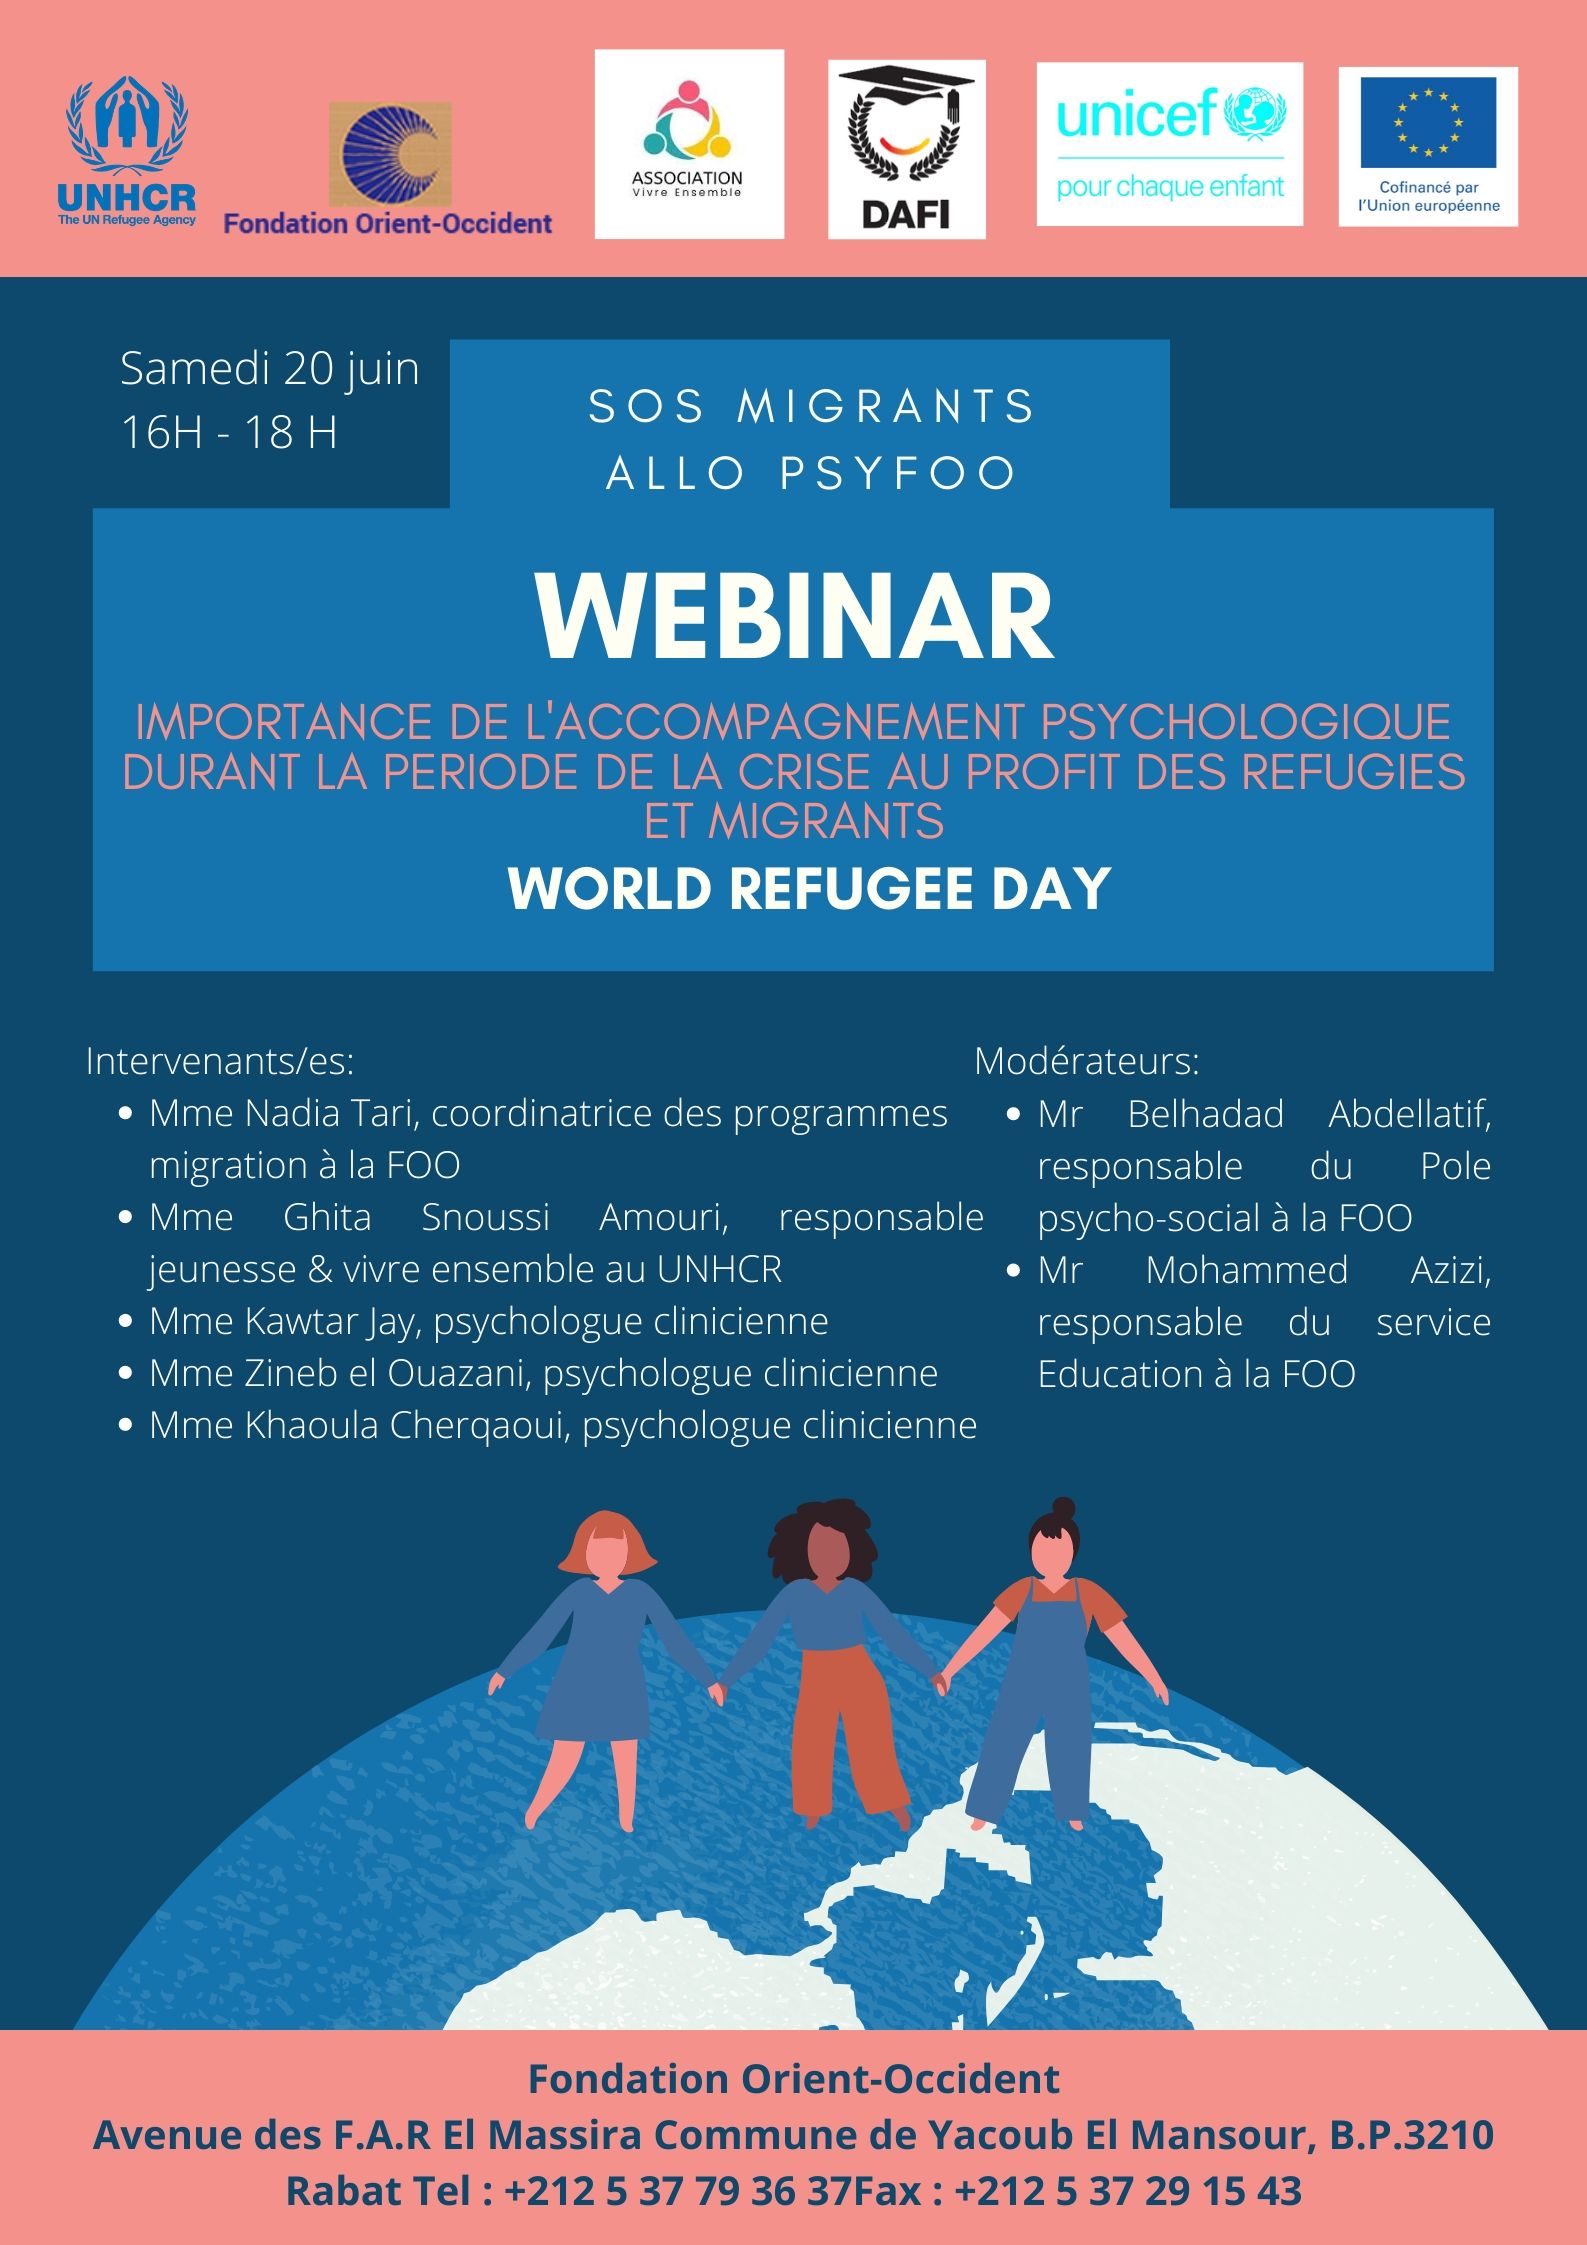 WEBINAR ON THE OCCASION OF THE WORLD REFUGEE DAY